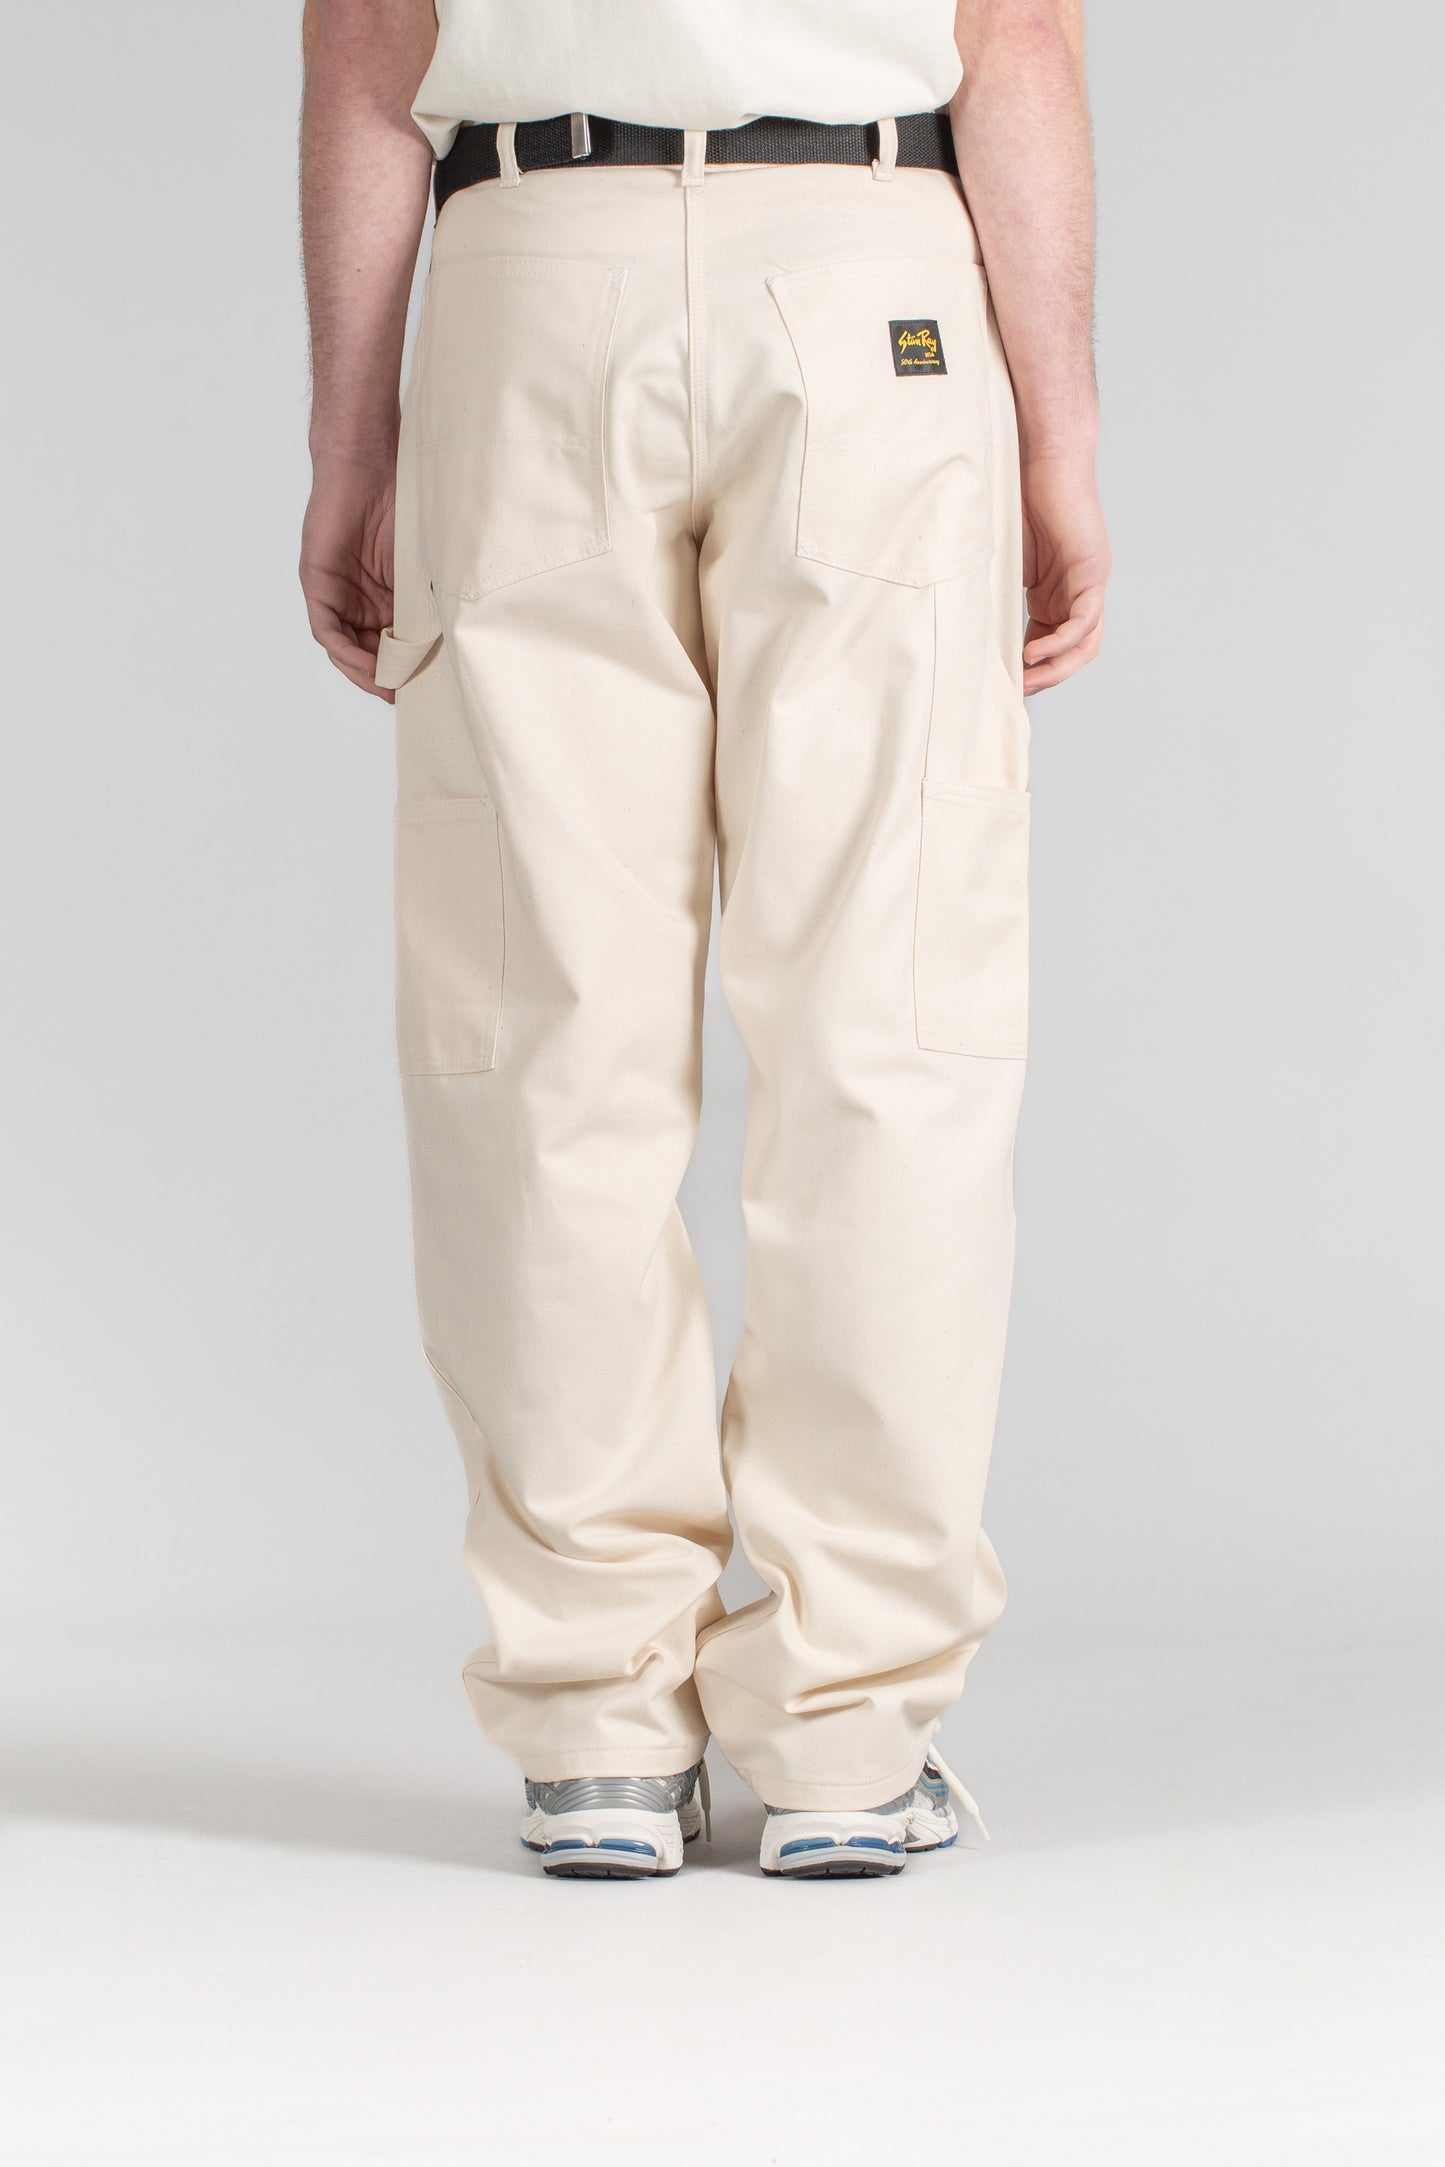 OG Painter Pant (Natural Drill) - Stan Ray